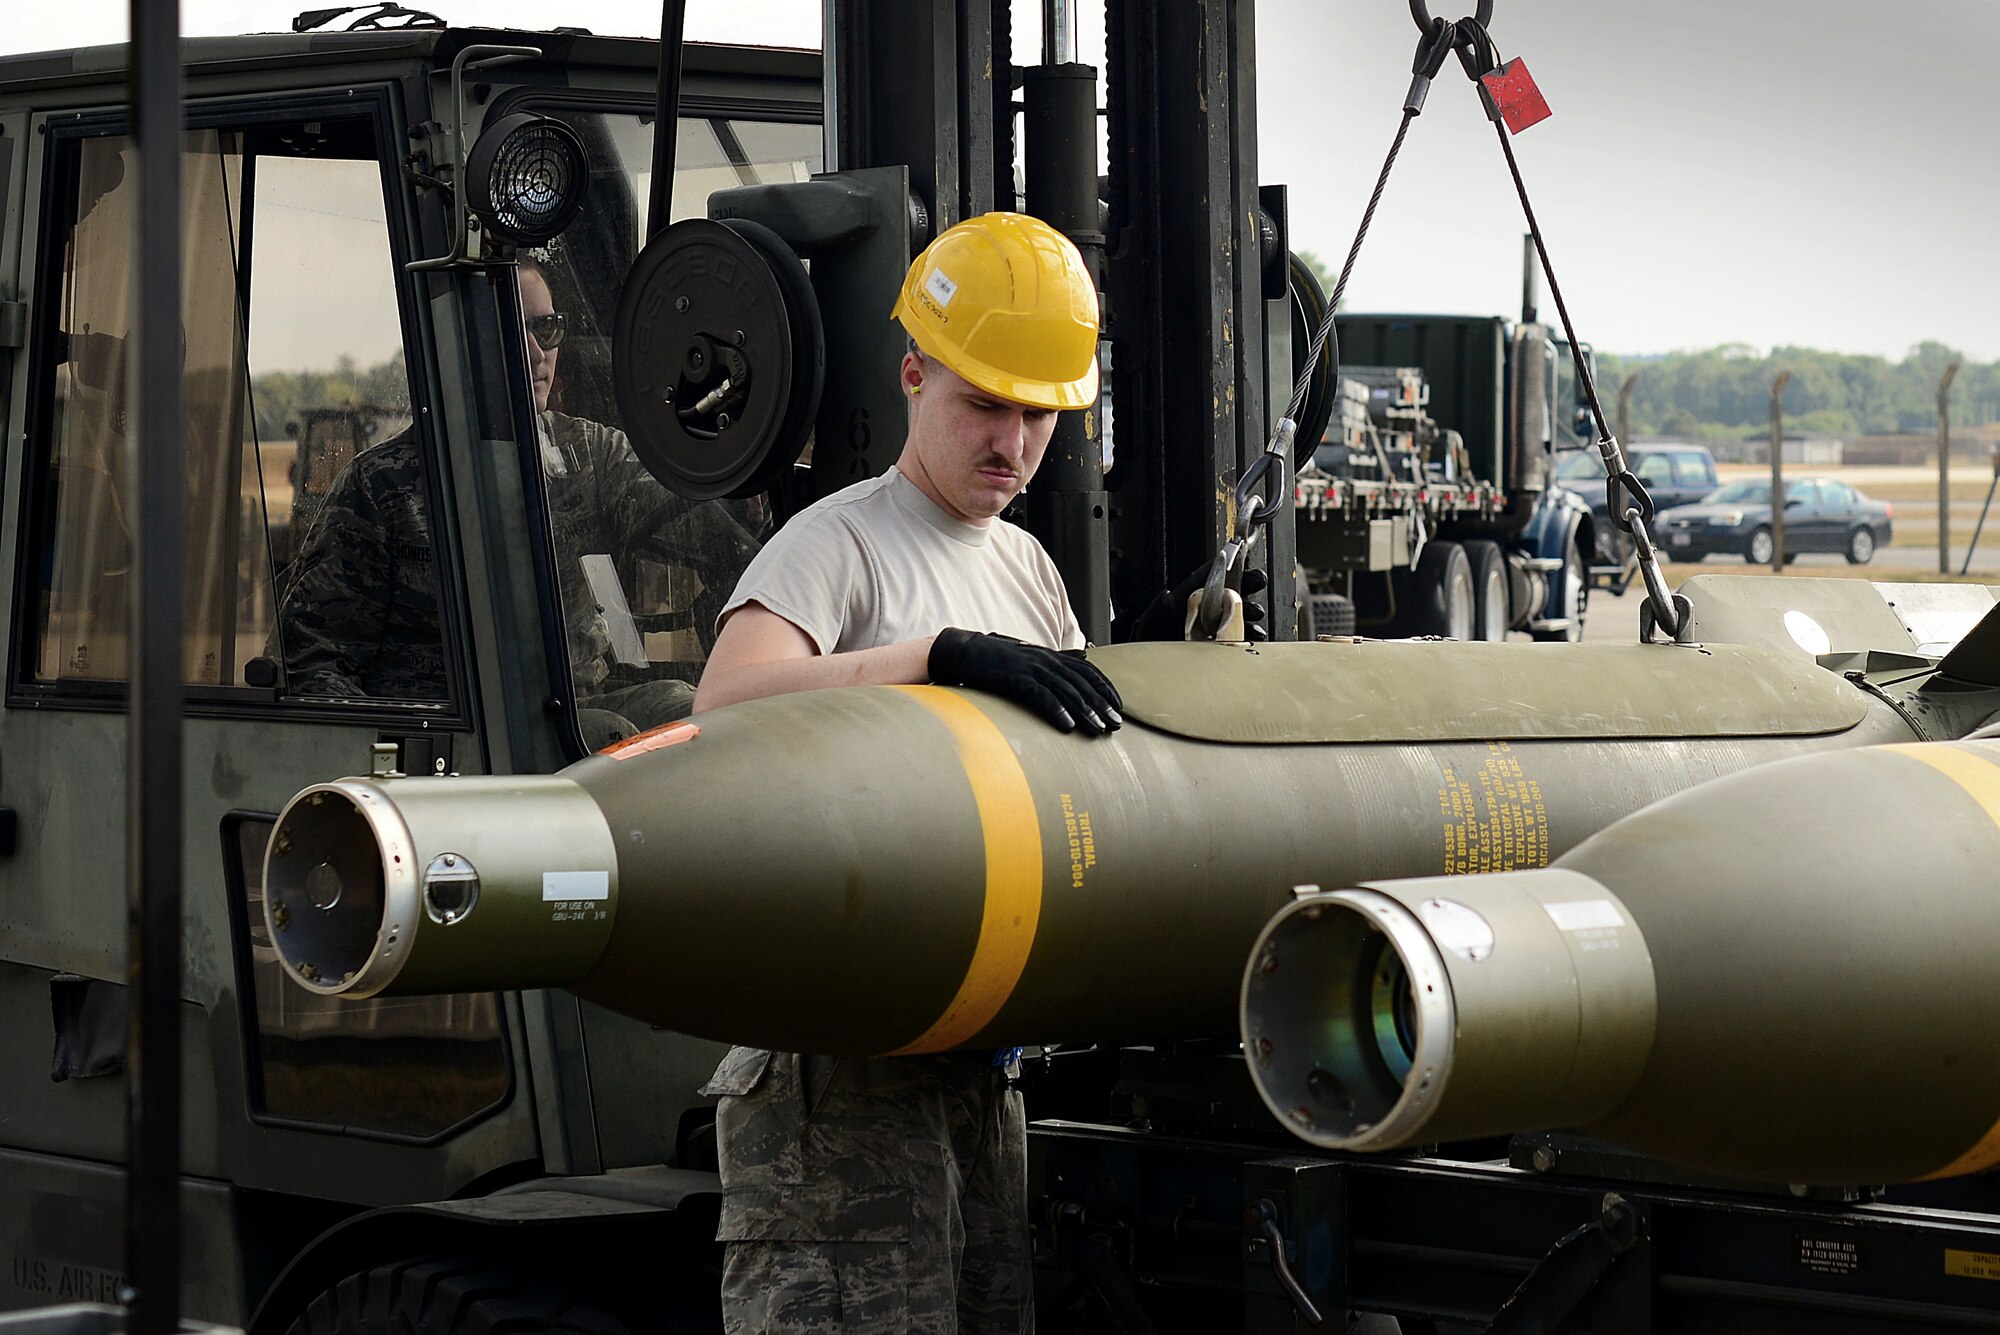 A 48th Fighter Wing munitions Airman prepares a GBU-24 Paveway III laser-guided bomb for transport during the United States Air Forces in Europe-Air Forces Africa’s inaugural Combat Ammunition Production Exercise July 17, 2018. During the exercise, munitions experts demonstrated their ability to build a variety of munitions including joint air-to-surface standoff missiles, air-to-air missiles, joint direct attack munitions, laser-guided bombs and small diameter bombs. (U.S. Air Force photo/ Tech. Sgt. Matthew Plew)